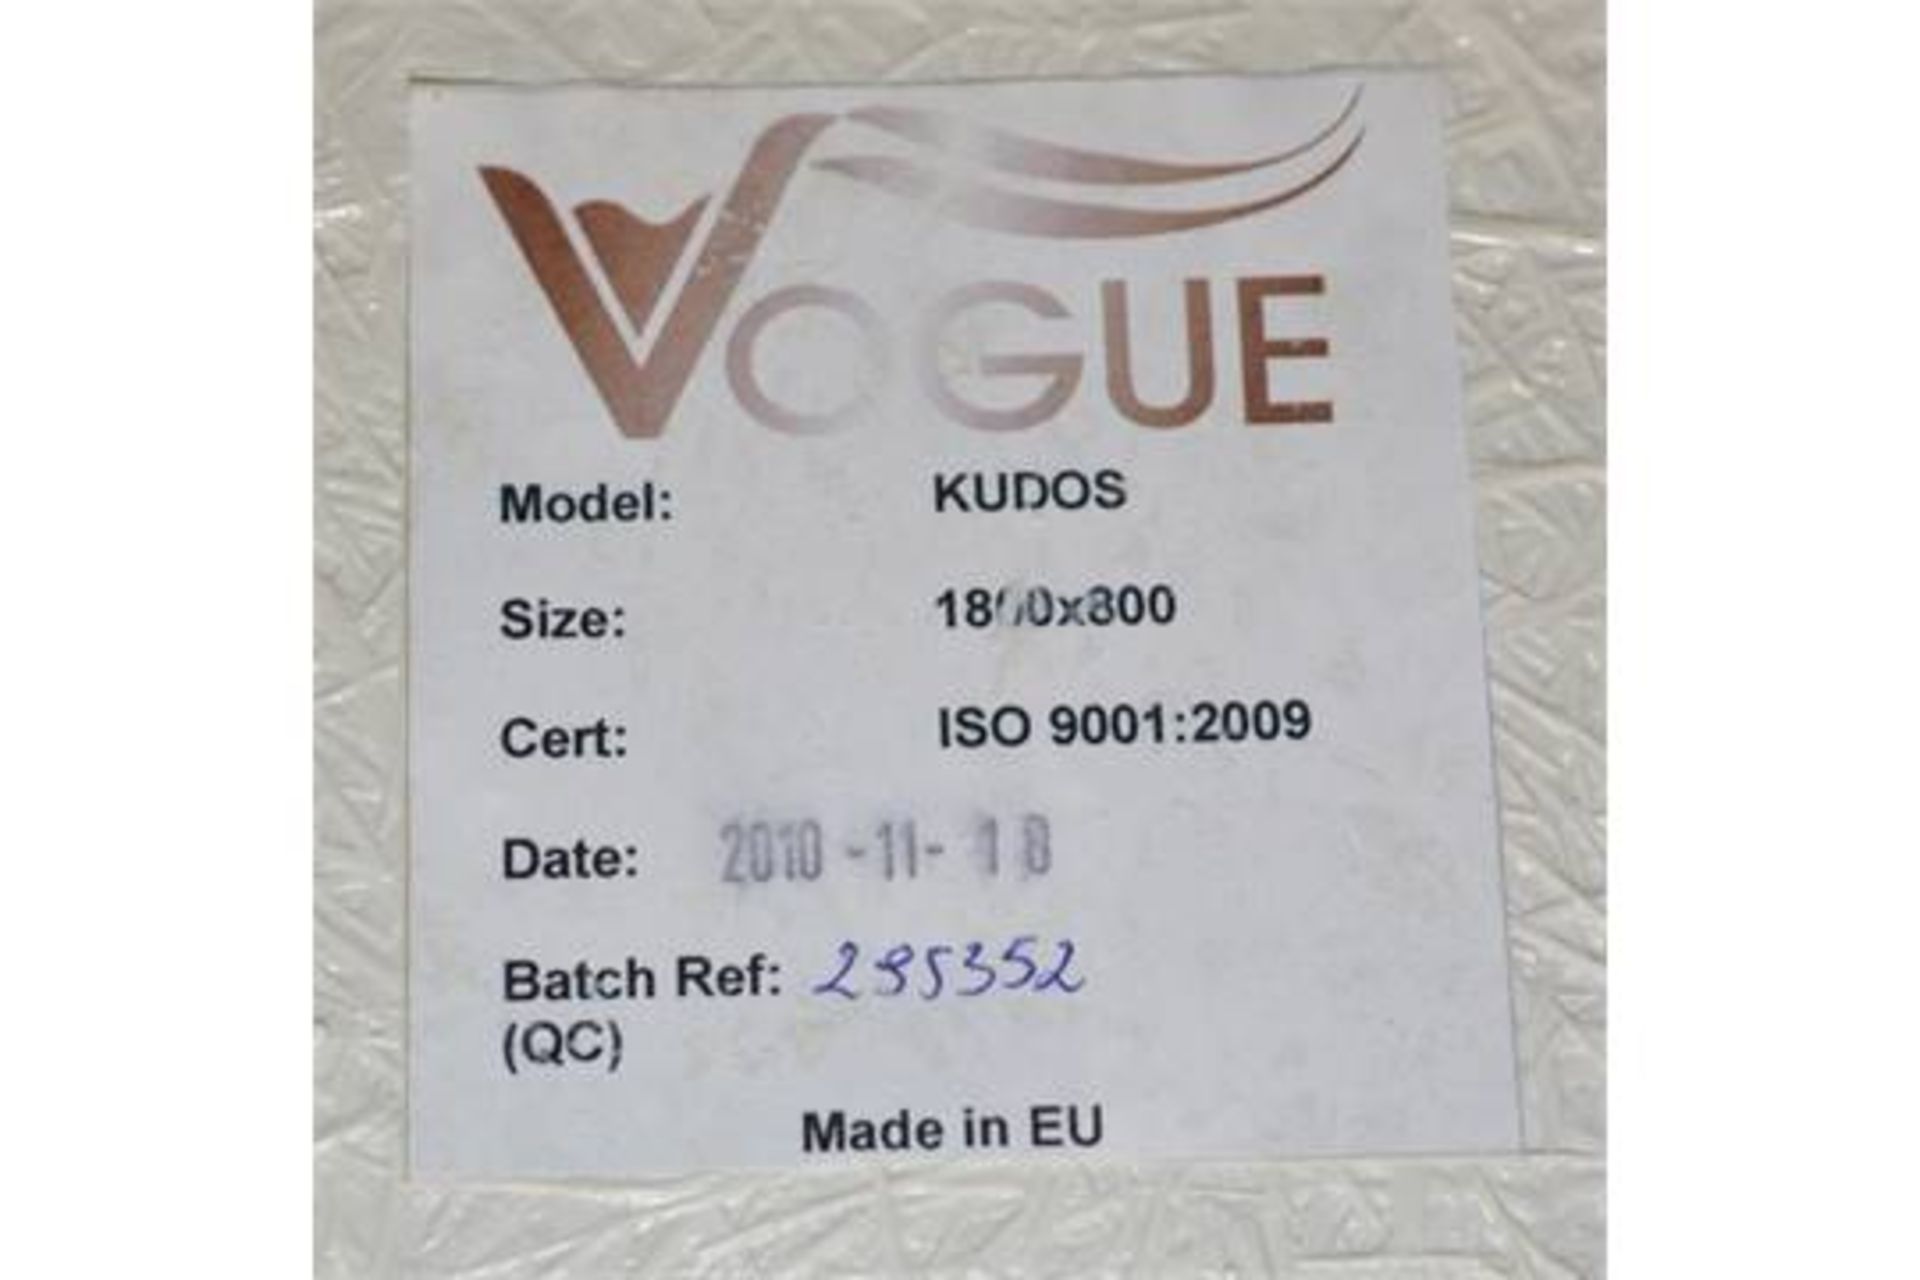 1 x Kudos Single End Inset Bath Tub - Vogue Bathrooms - 1800x800mm - Brand New Stock - Ref P6 - High - Image 3 of 3